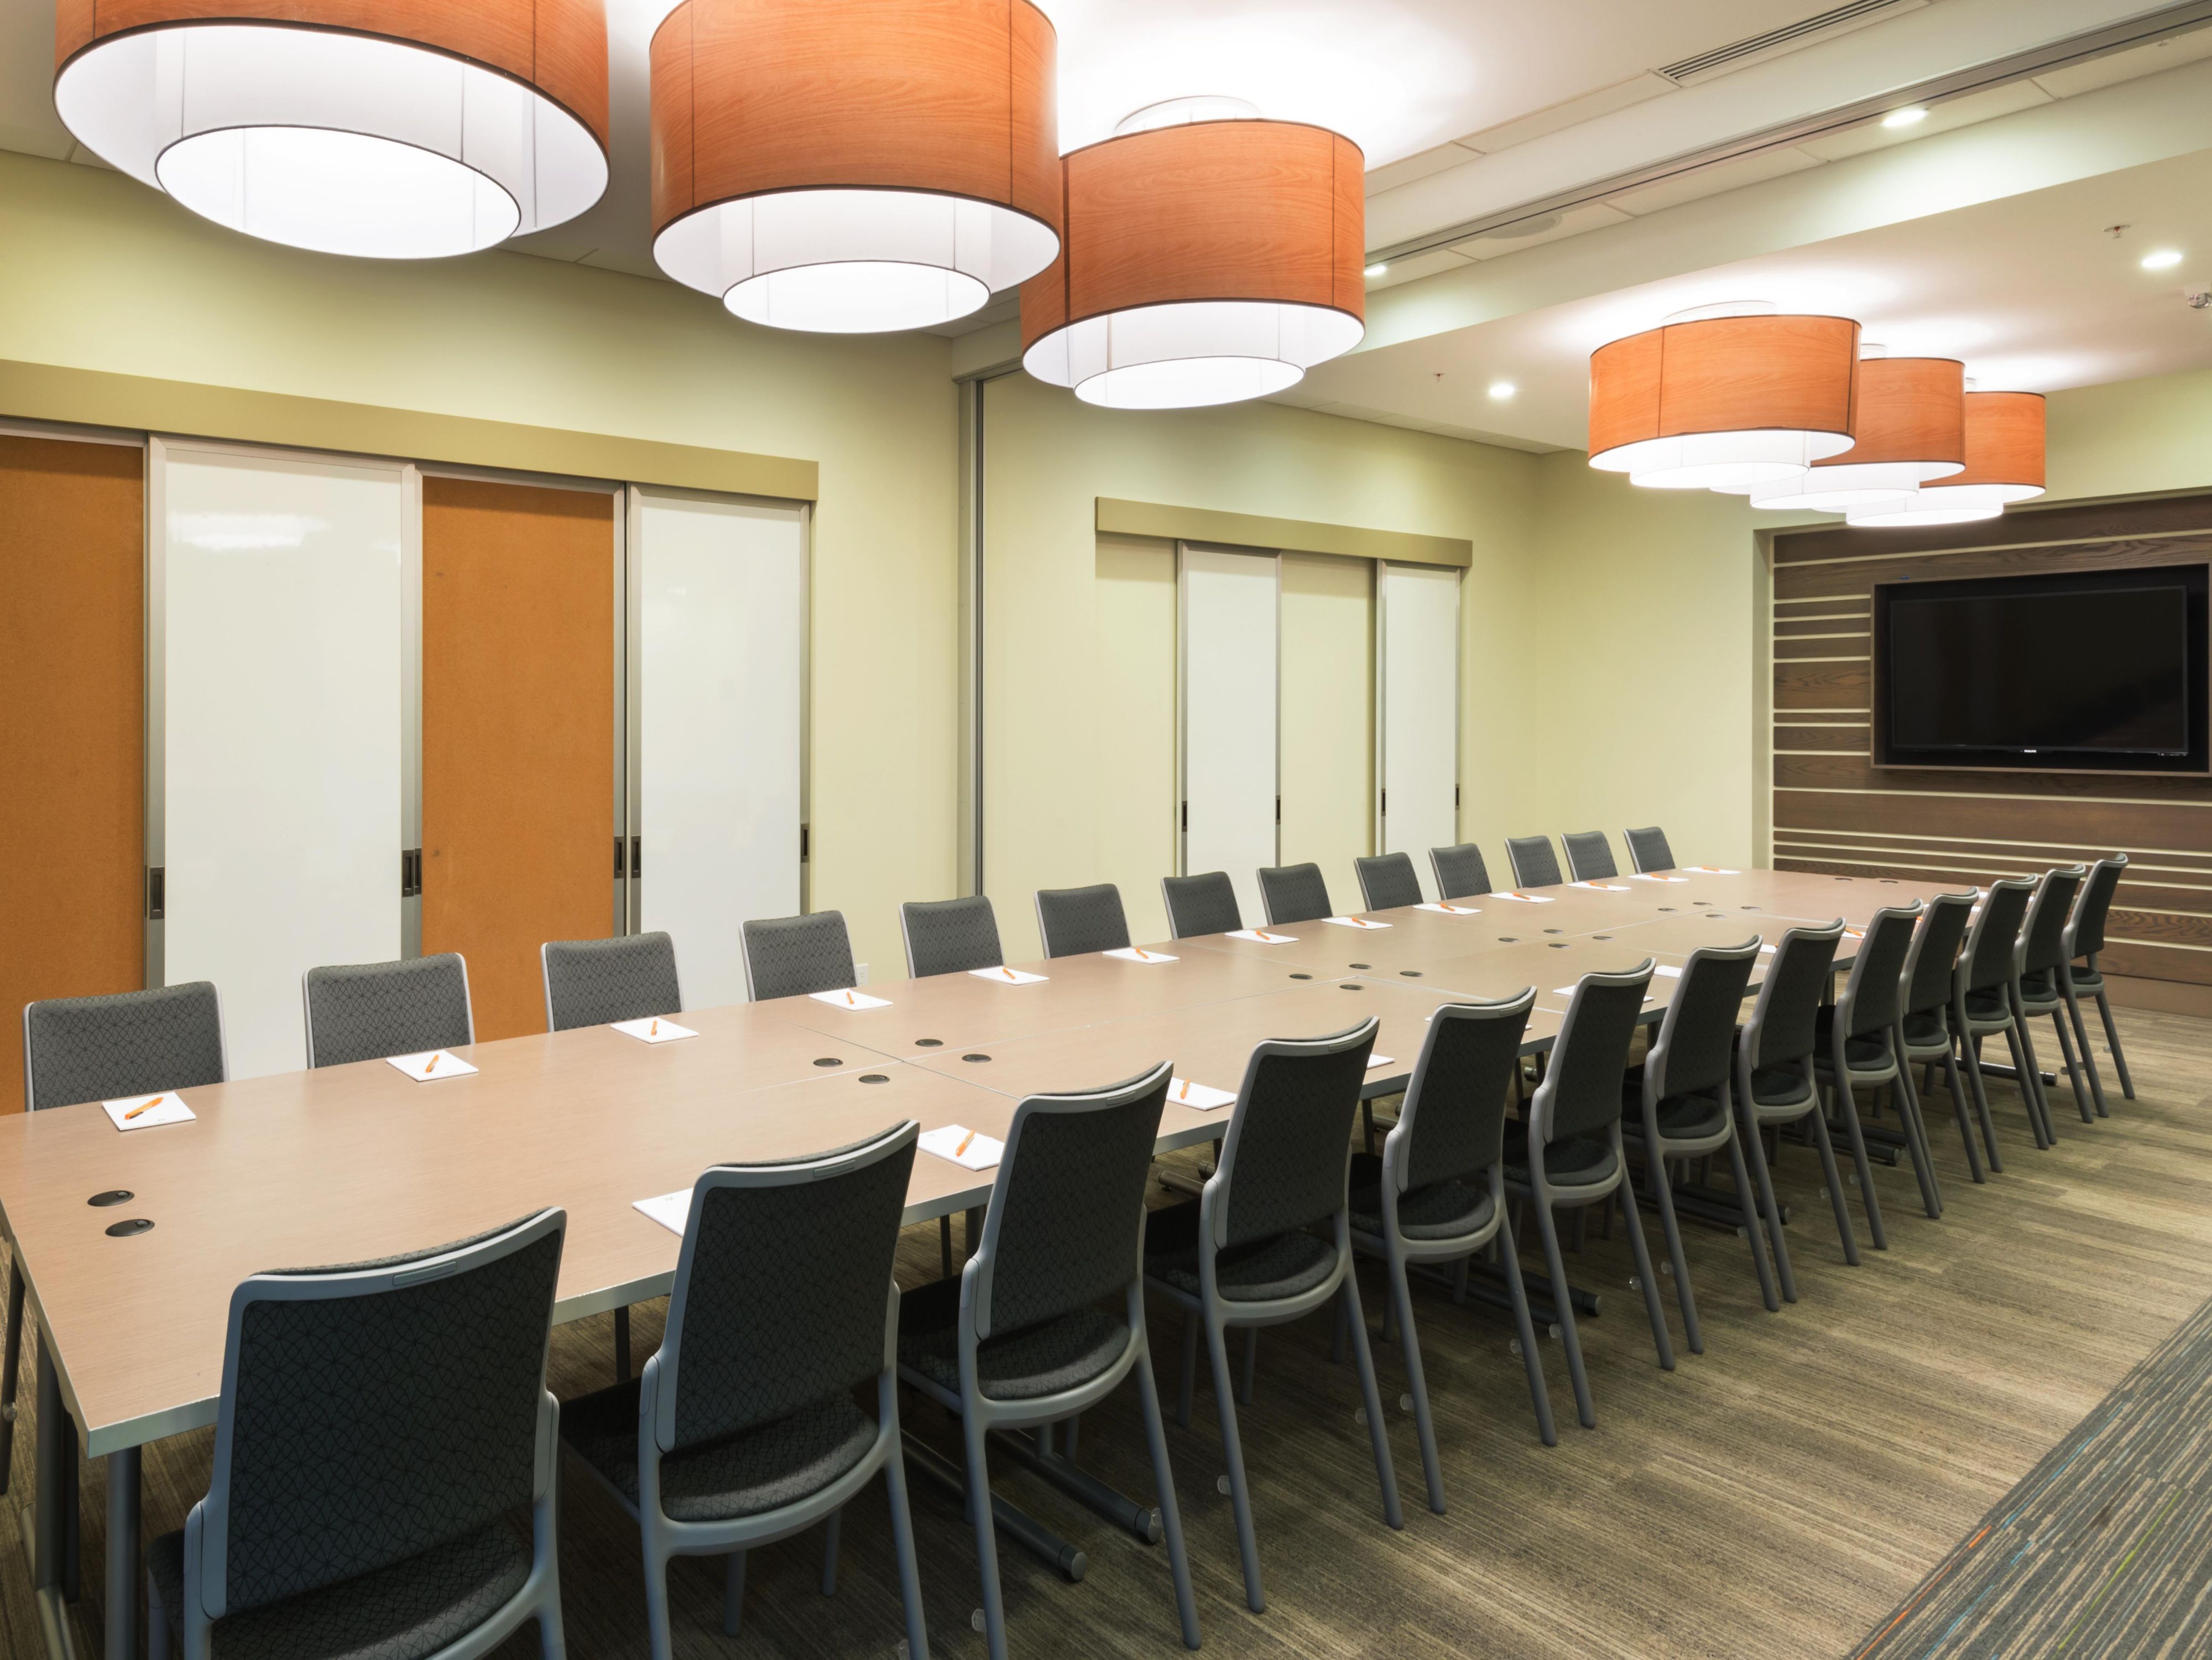 With a central location and modern amenities, our Rockville hotel offers the ideal event space for small business meetings, family reunions, and intimate social gatherings. Treat guests to healthy catering options from our onsite restaurant EVEN Kitchen & Bar and stay productive with complimentary high-speed Wi-Fi.​